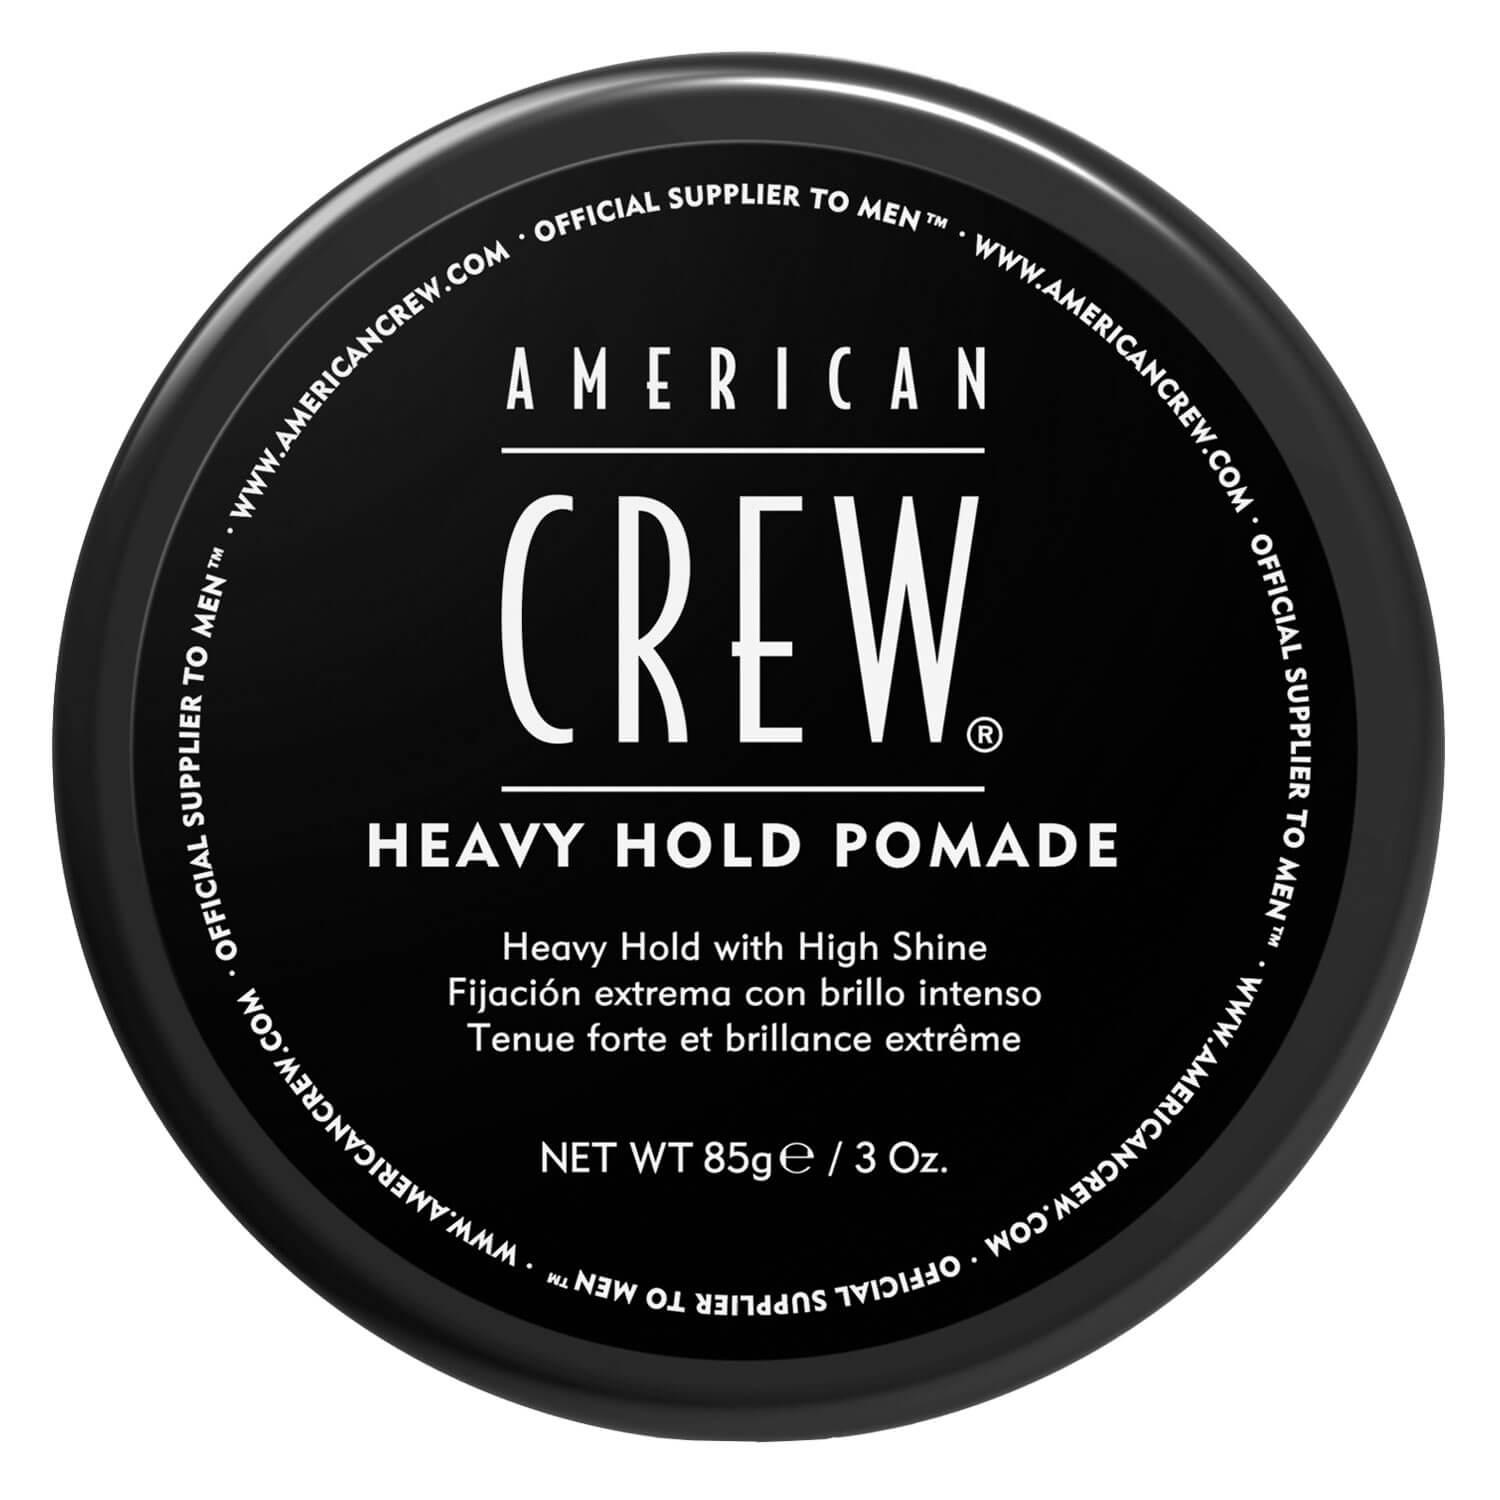 Style - Heavy Hold Pomade